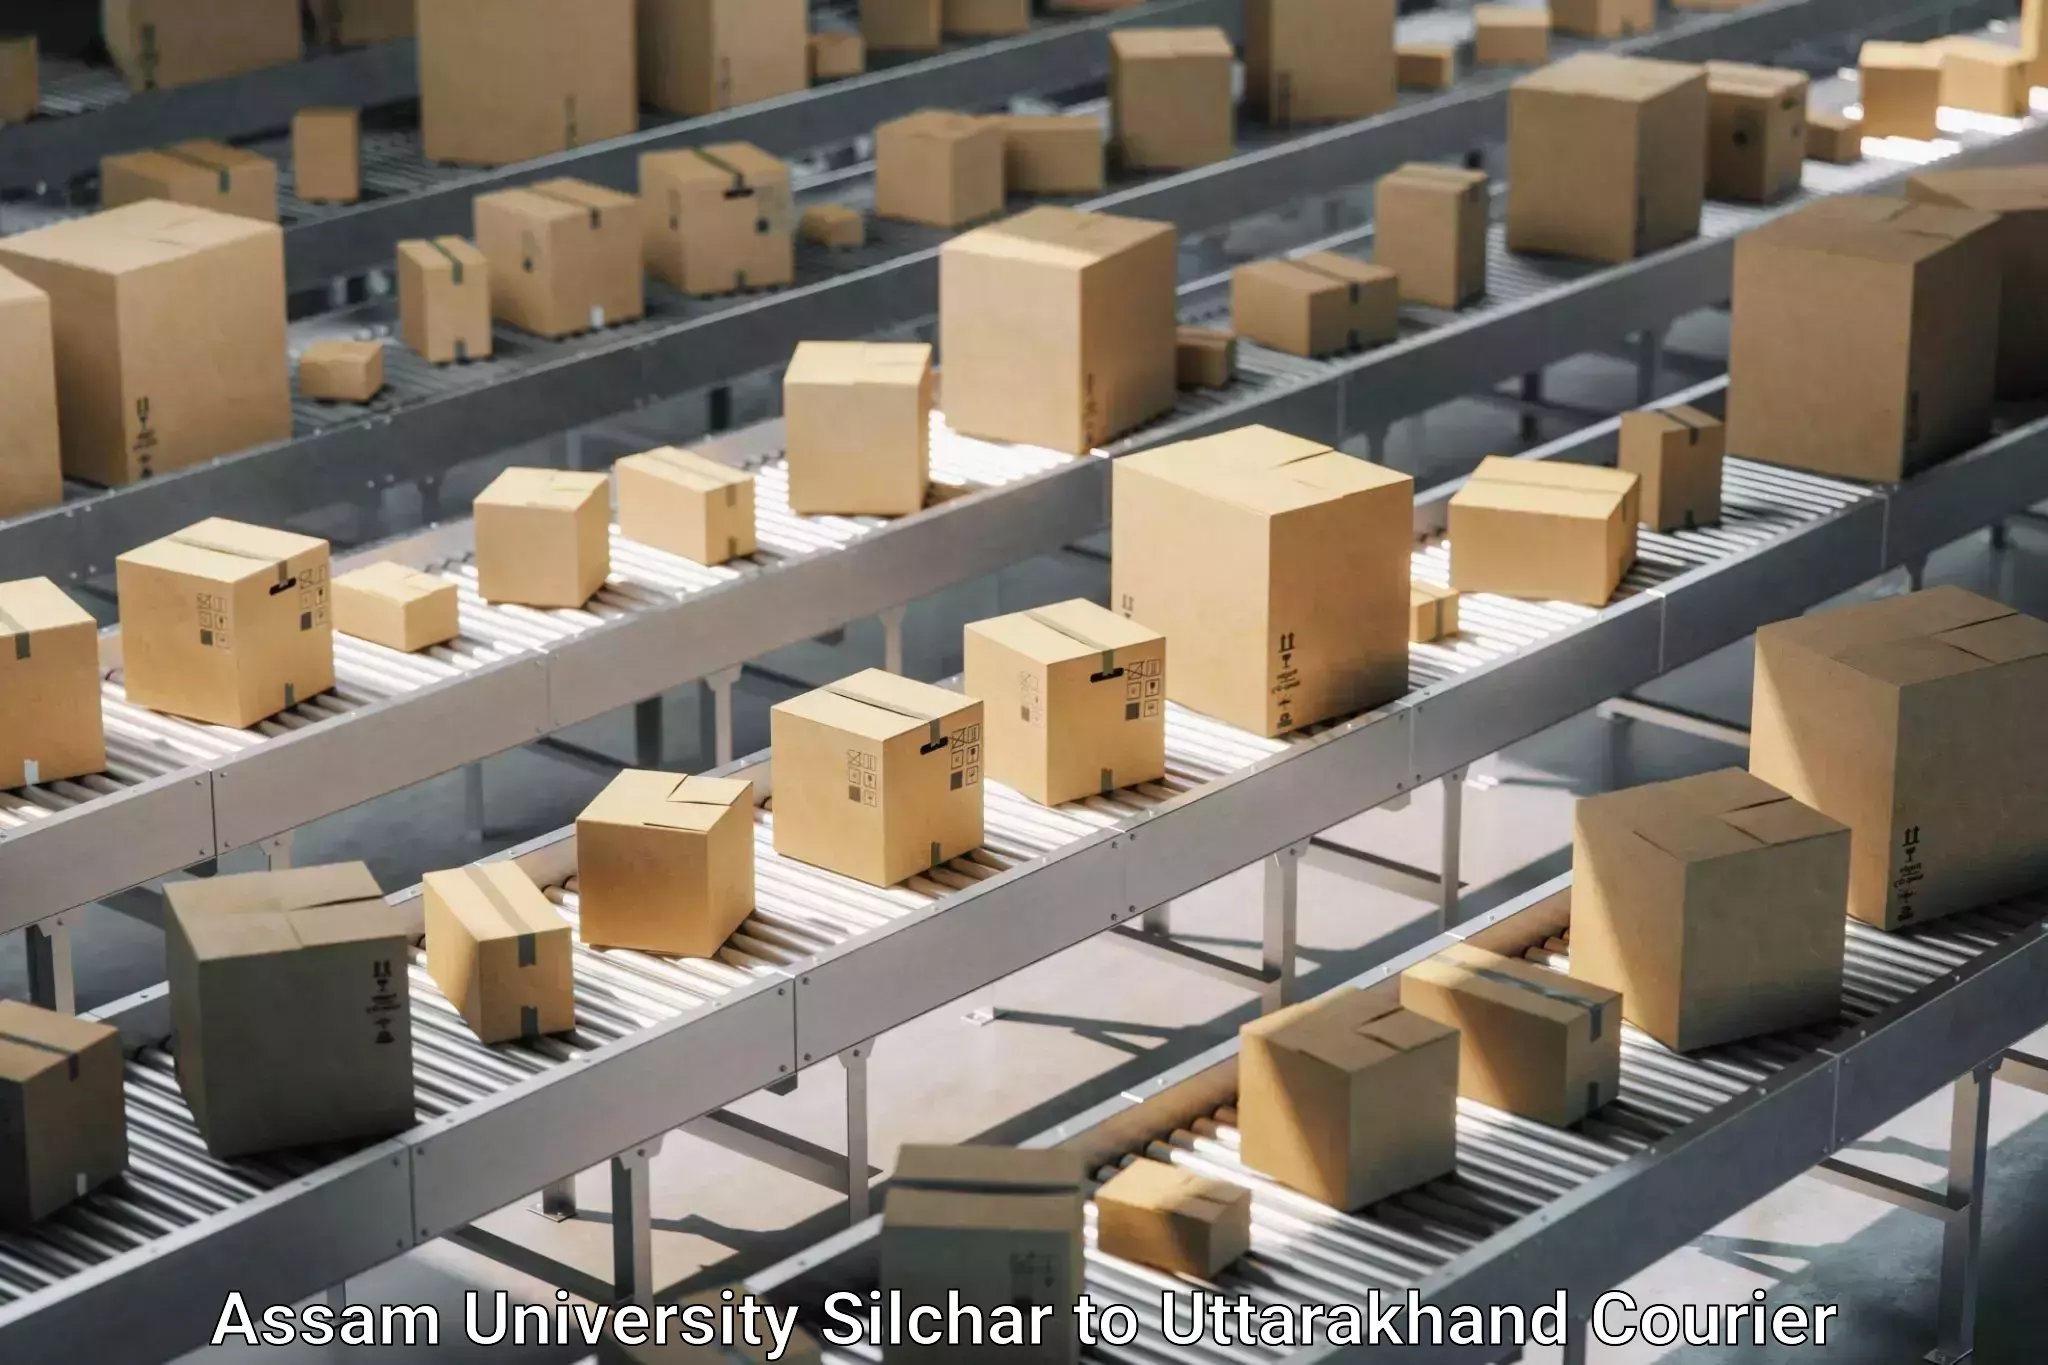 Efficient packing and moving Assam University Silchar to IIT Roorkee